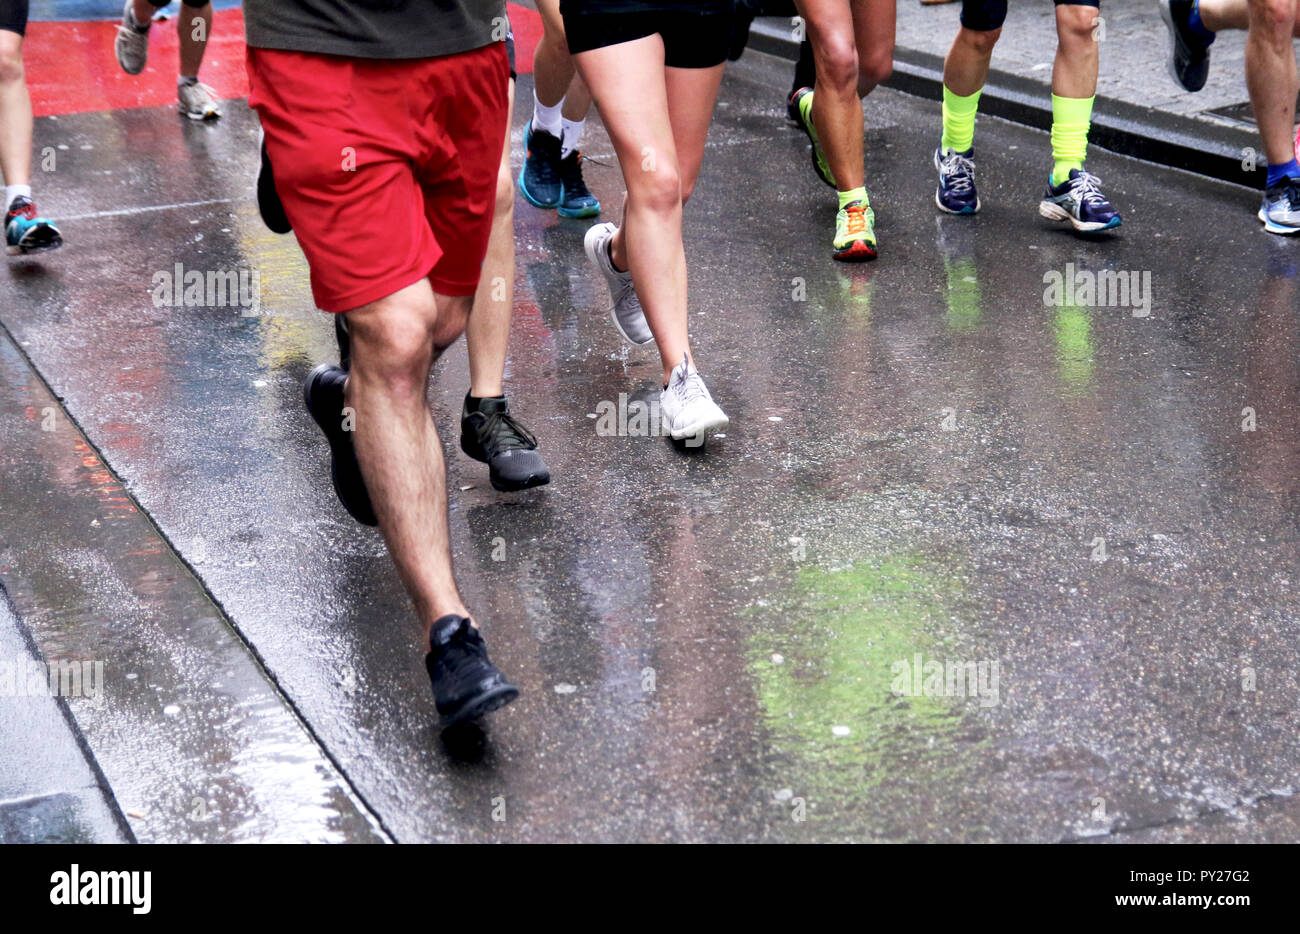 Runners racing on a rainy day Stock Photo